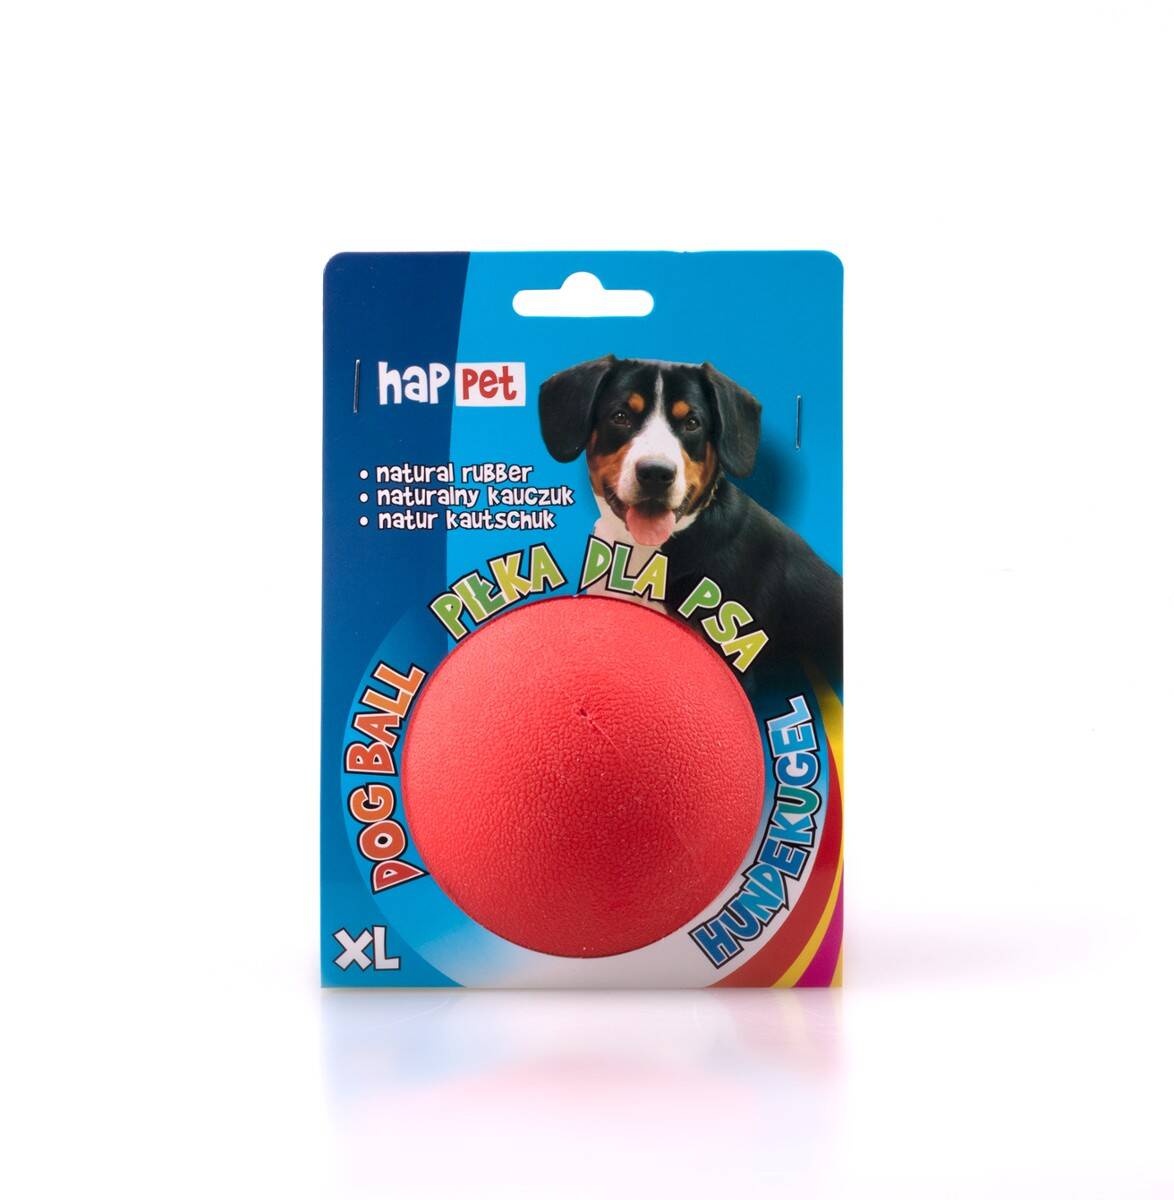 Rubber ball for a dog 90mm